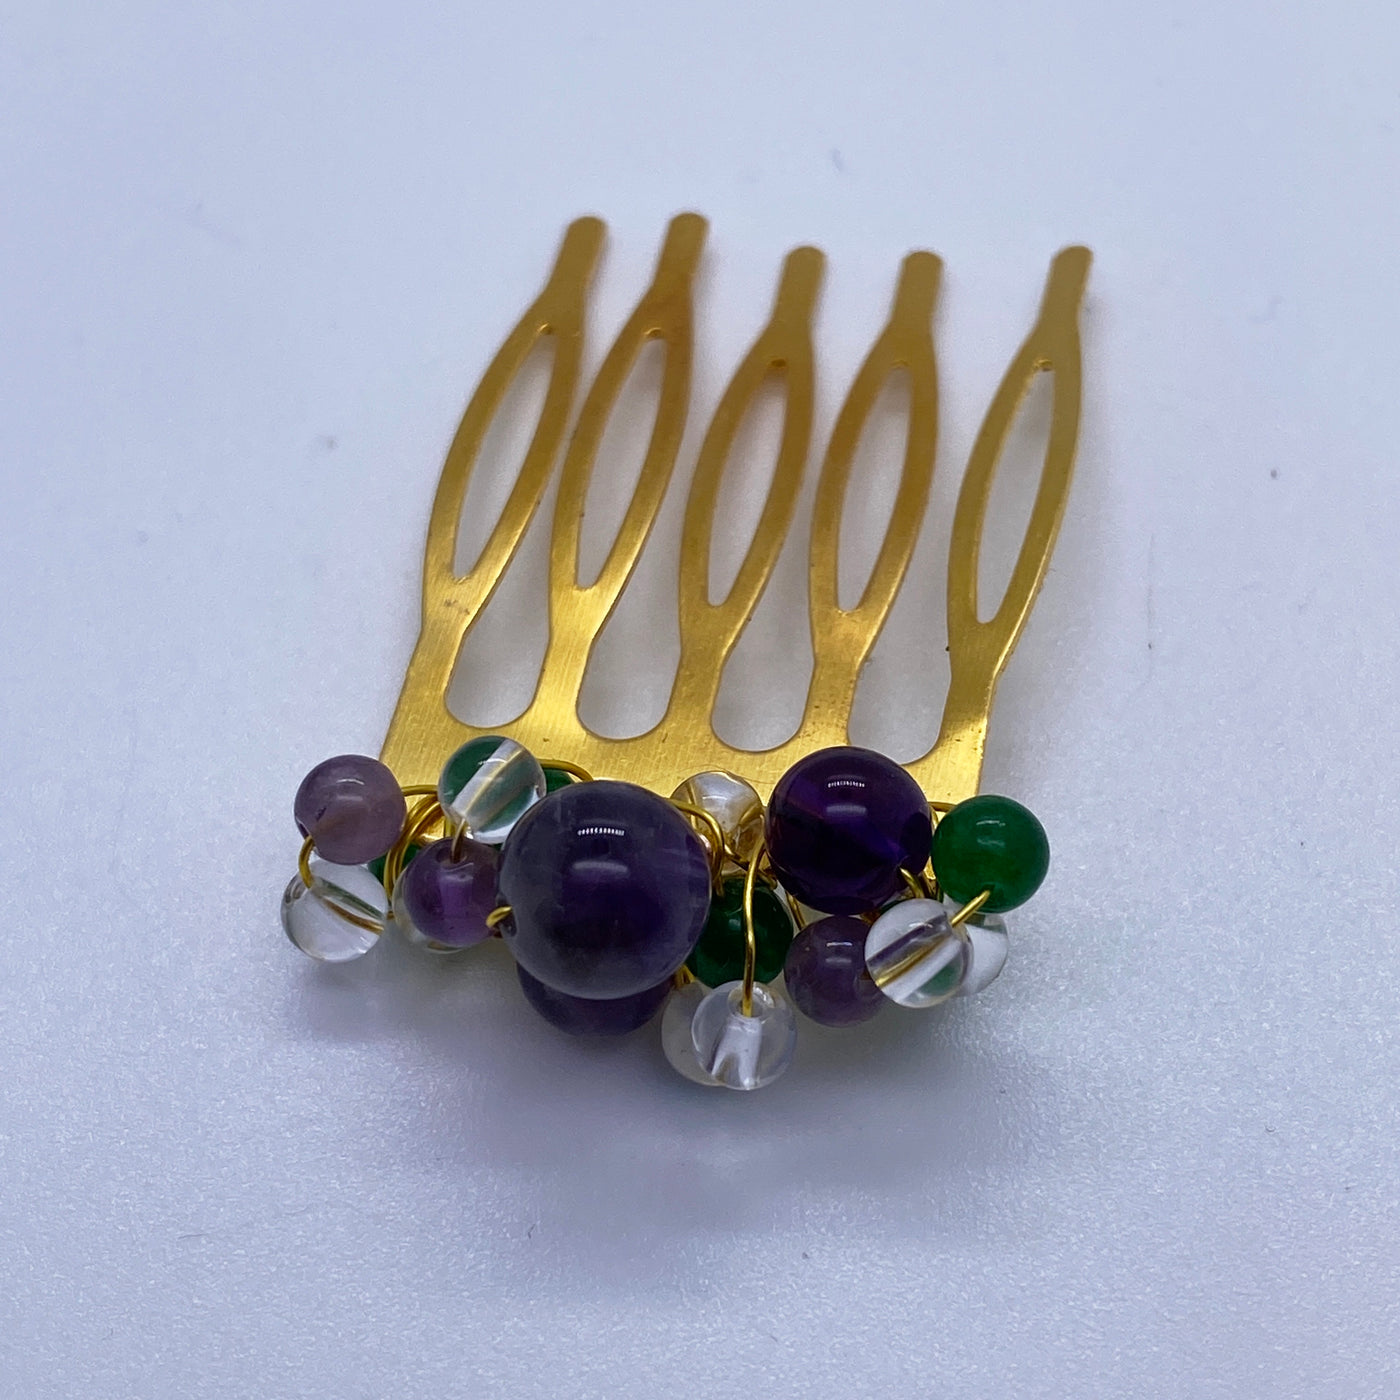 Green calchedony, amethysts, opales, golden wire and white quartz crystals for this hair combs simple tuck five teeth metal combs gold color